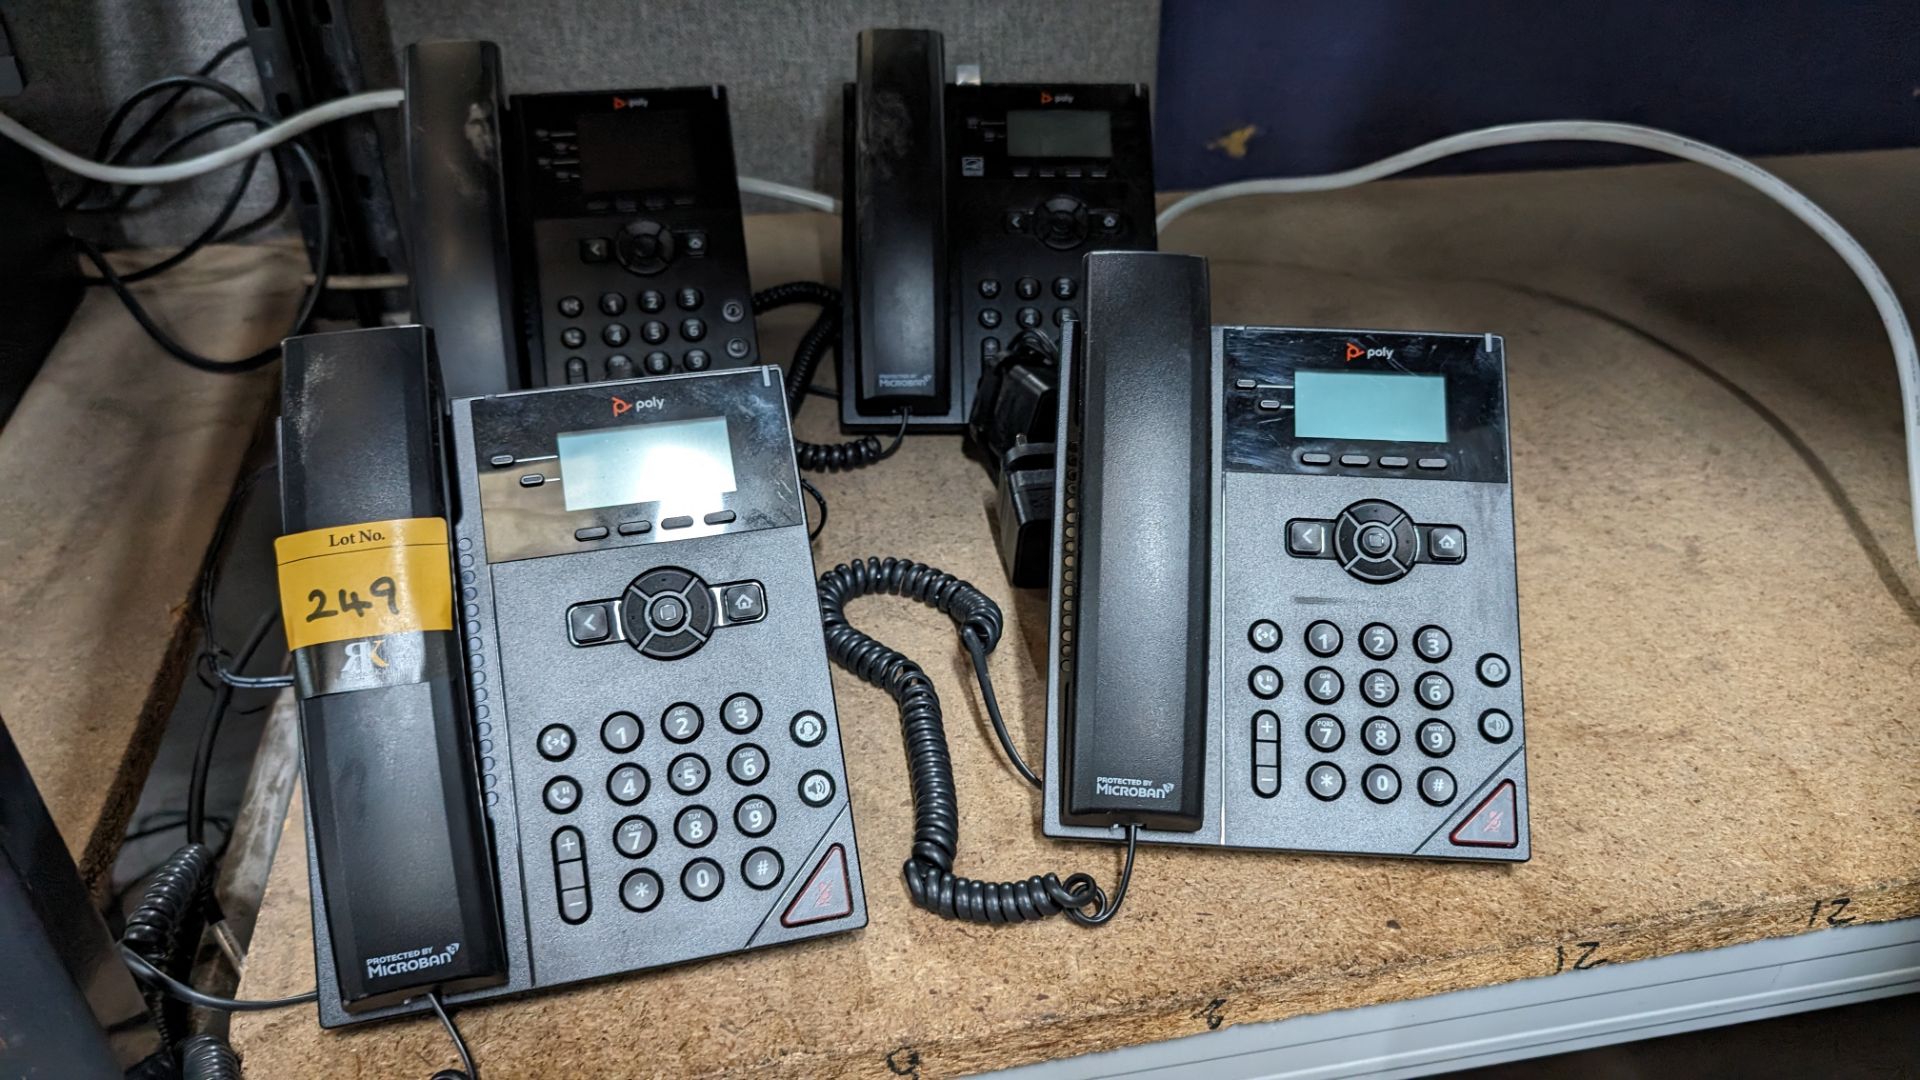 4 off Poly telephone handsets